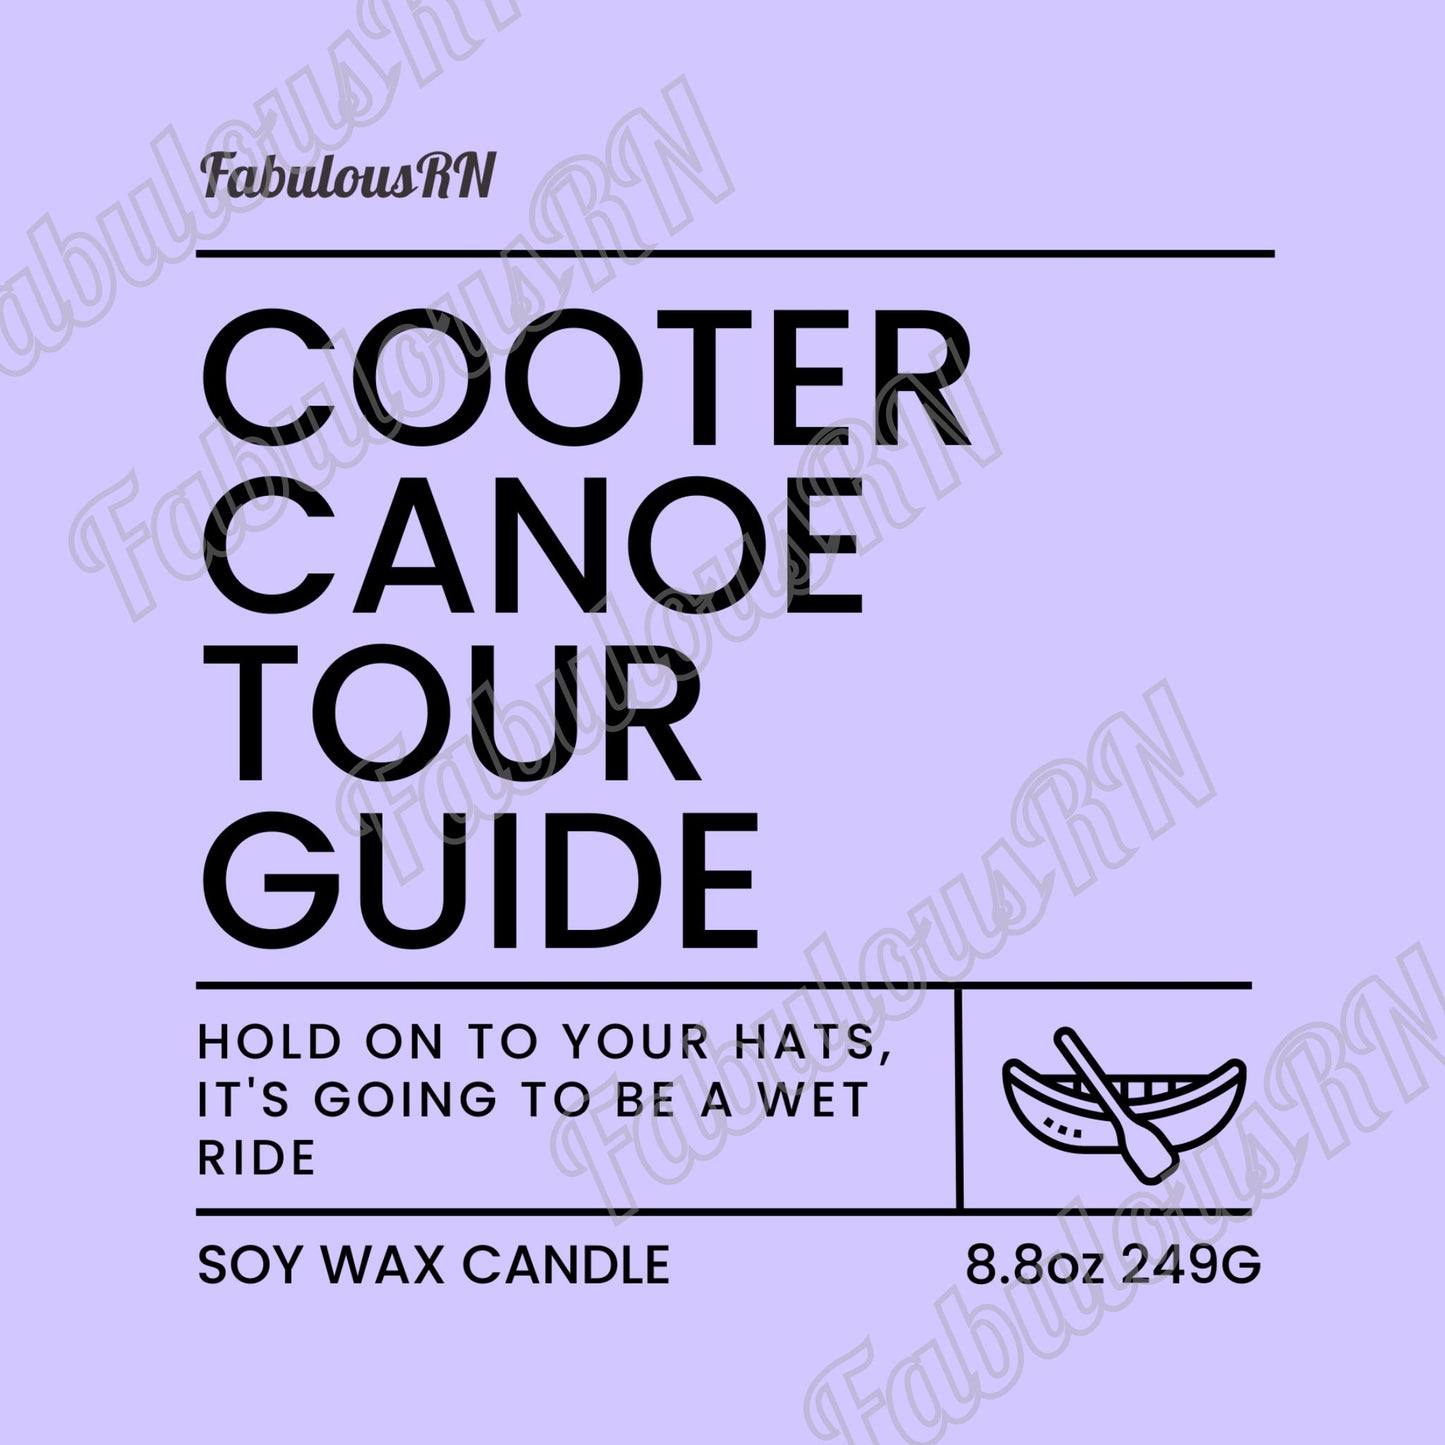 Cooter Canoe Tour Guide